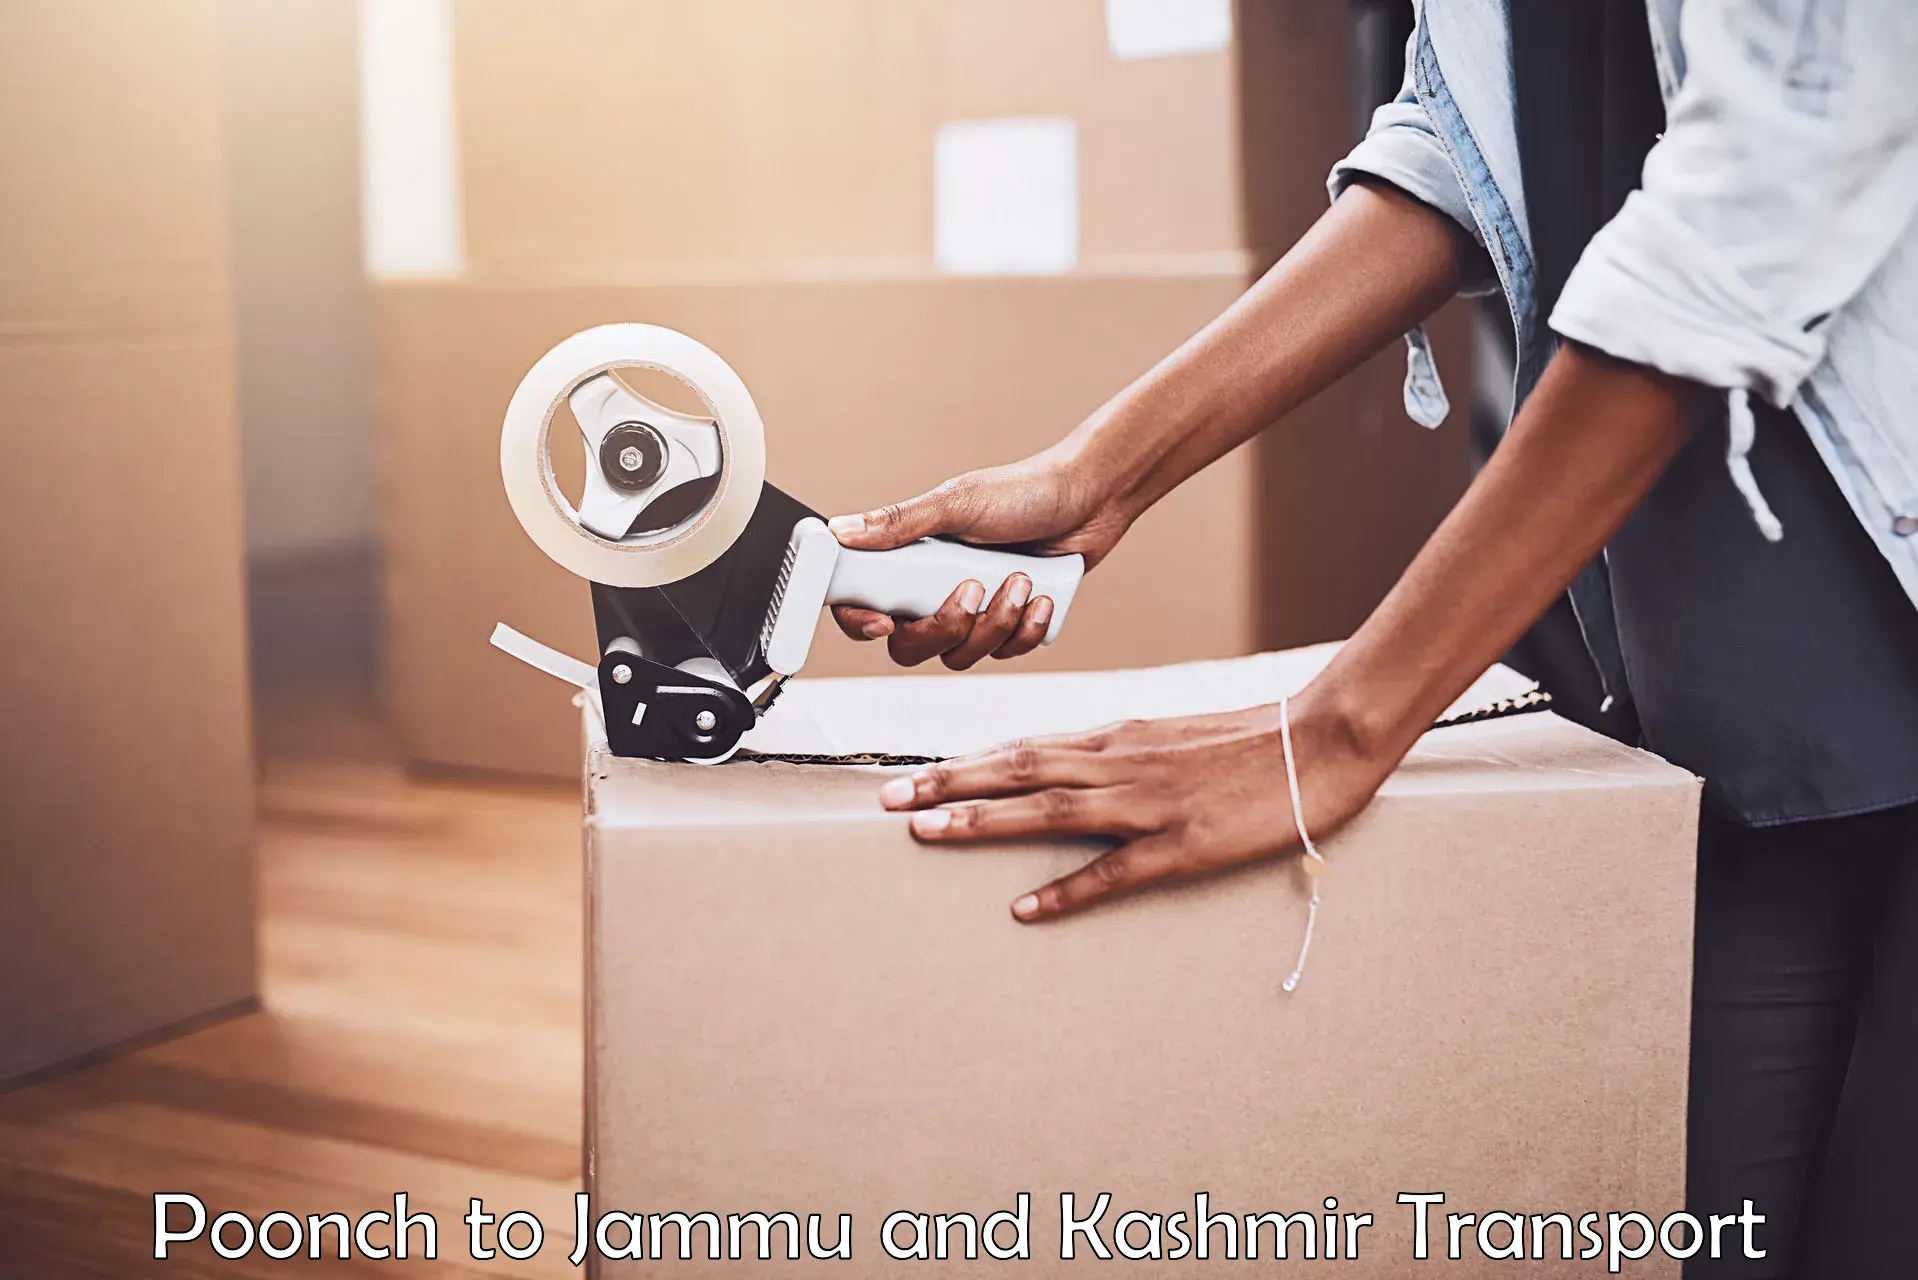 Transport shared services Poonch to Jammu and Kashmir